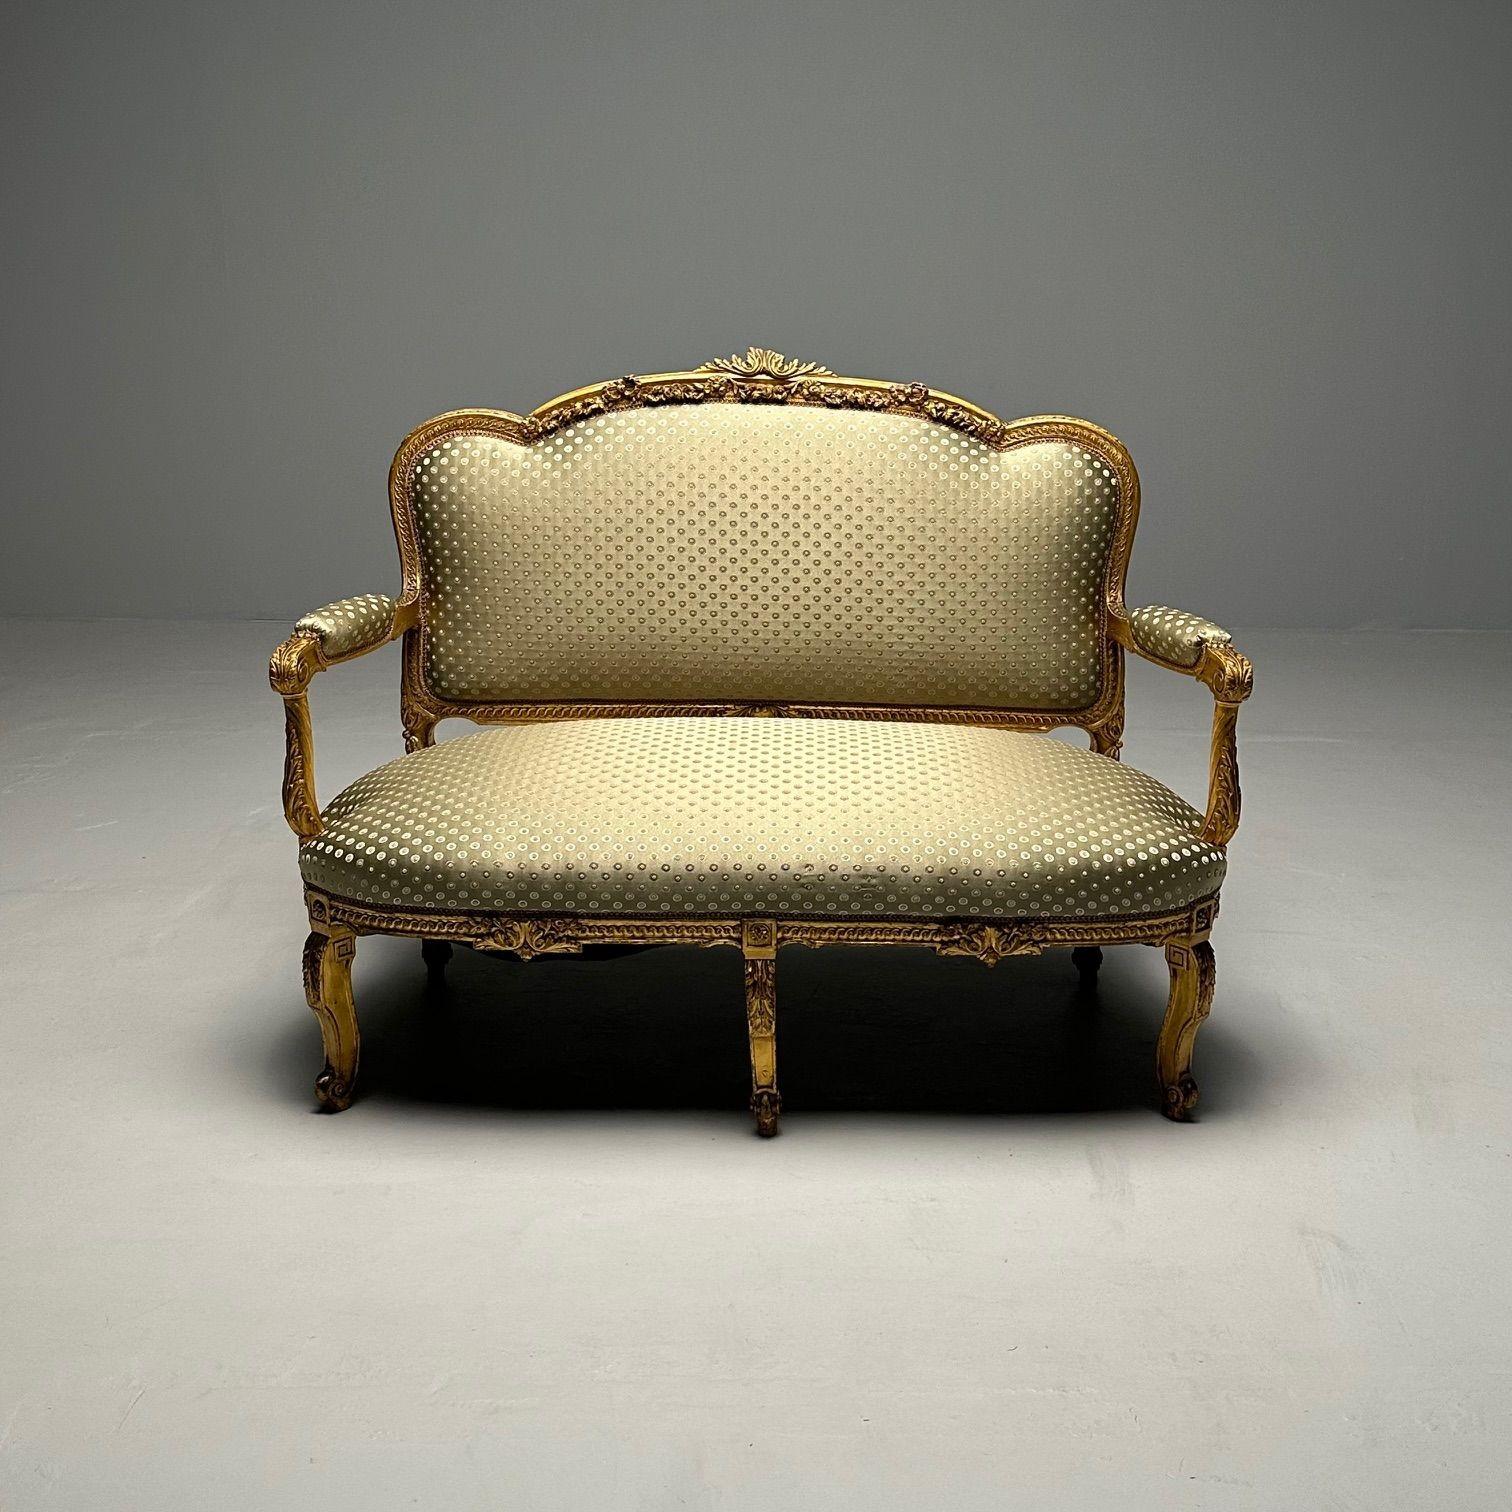 19th Century Settee / Canape, Durand, Louis XV, Giltwood, New Handwoven Scalamandre Upholstery.
A charming Louis the XV settee comprised of a stunningly carved 19th century giltwood settee from the French house of Gervais Durand, unsigned. The whole